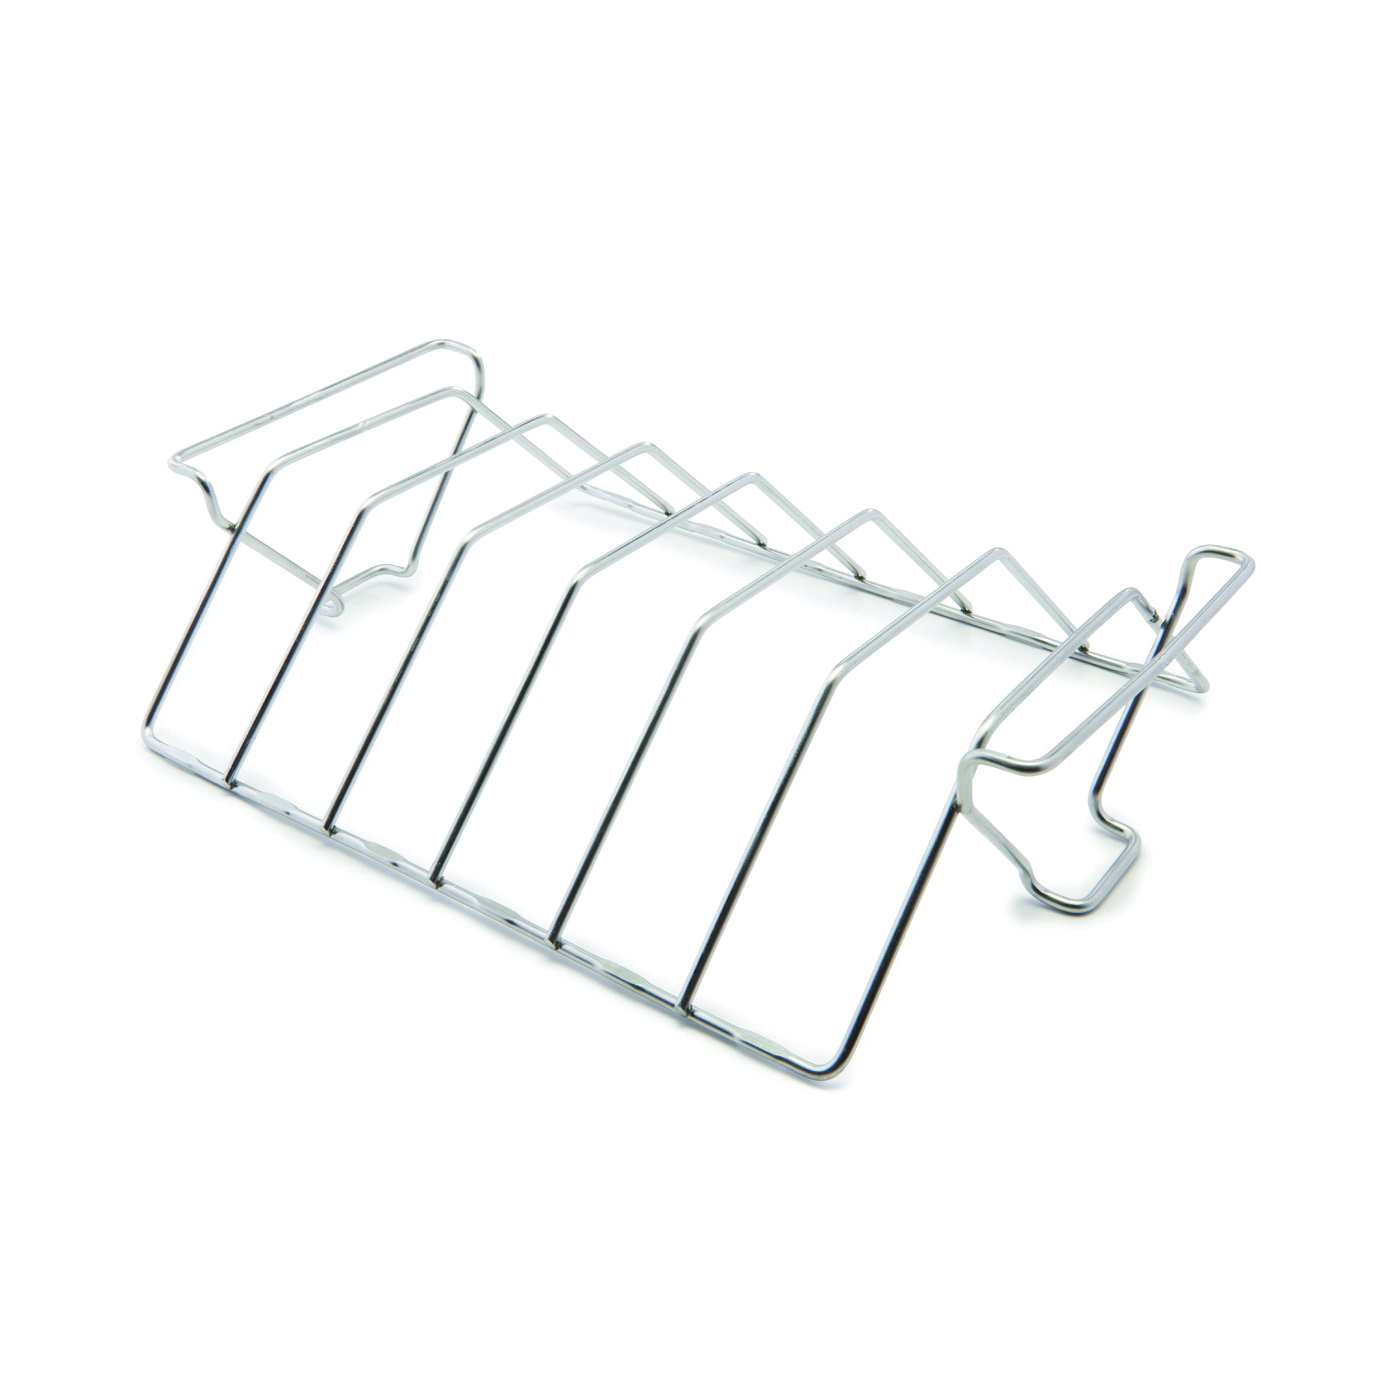 GrillPro 41616 Rib and Roast Rack, Stainless Steel - 1